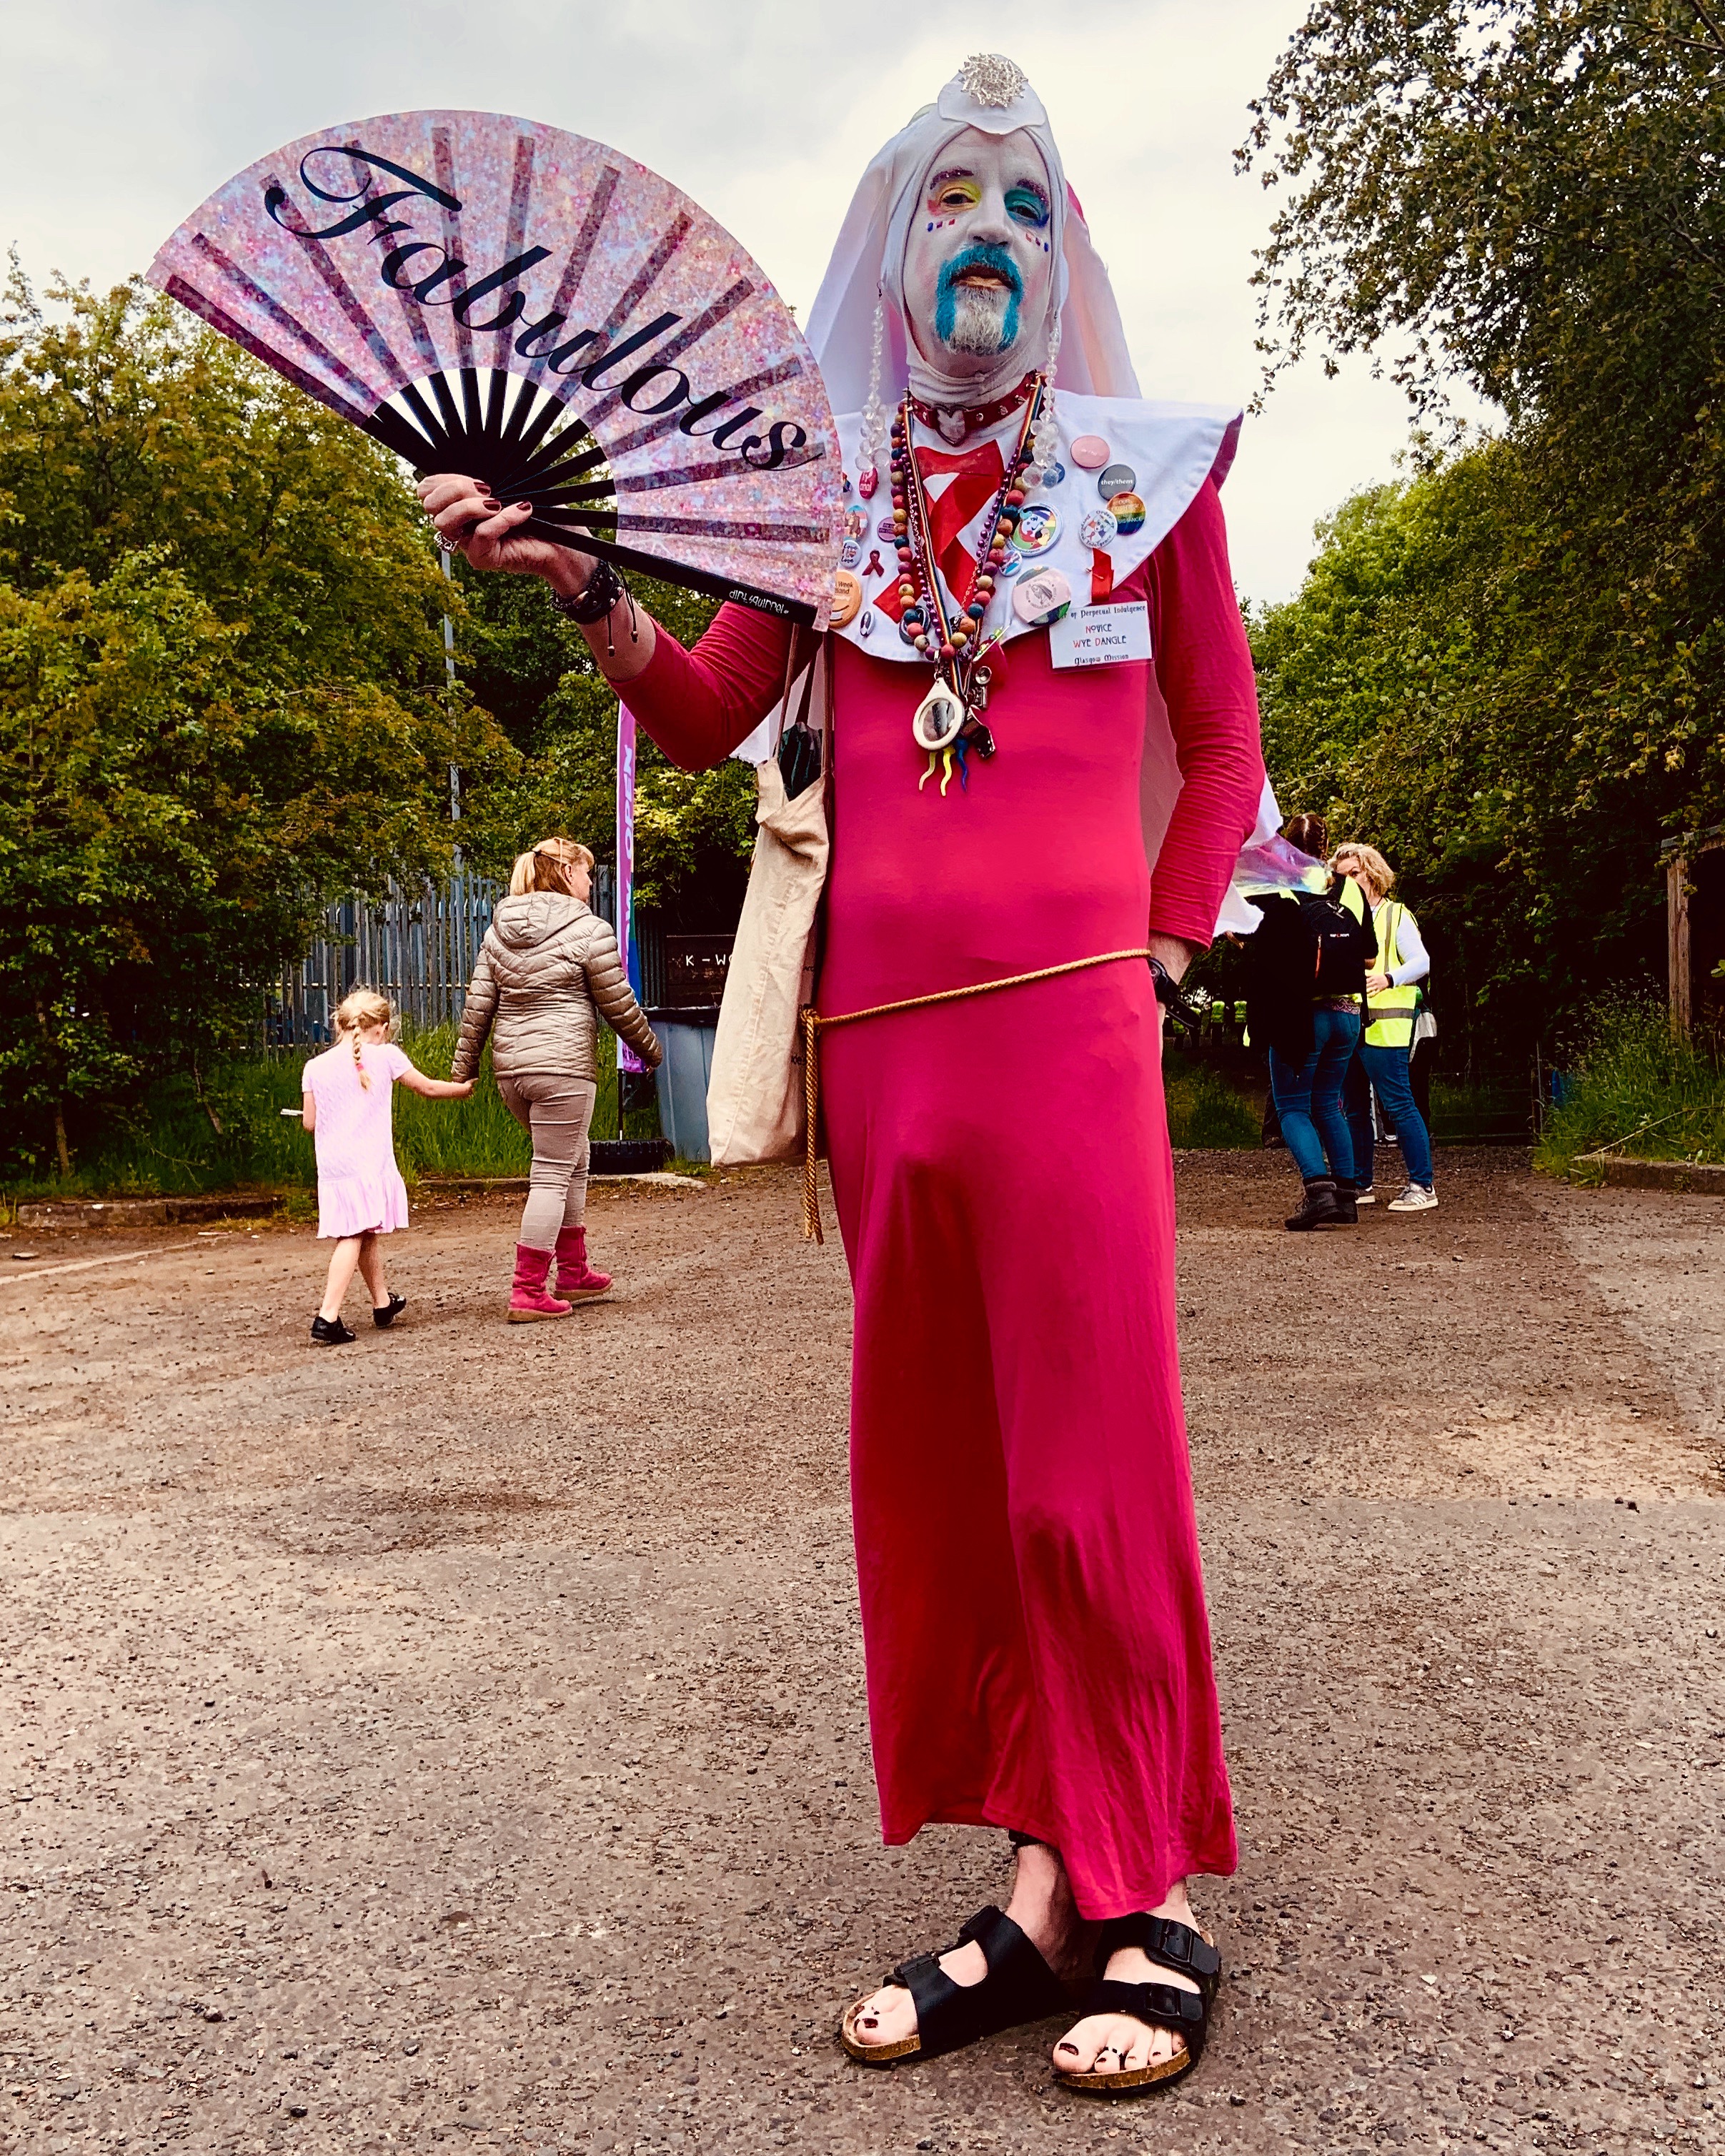 Novice Wye Dangle, of the Glasgow Mission of the Order of Perpetual Indulgence, at K-Pride in June 2019